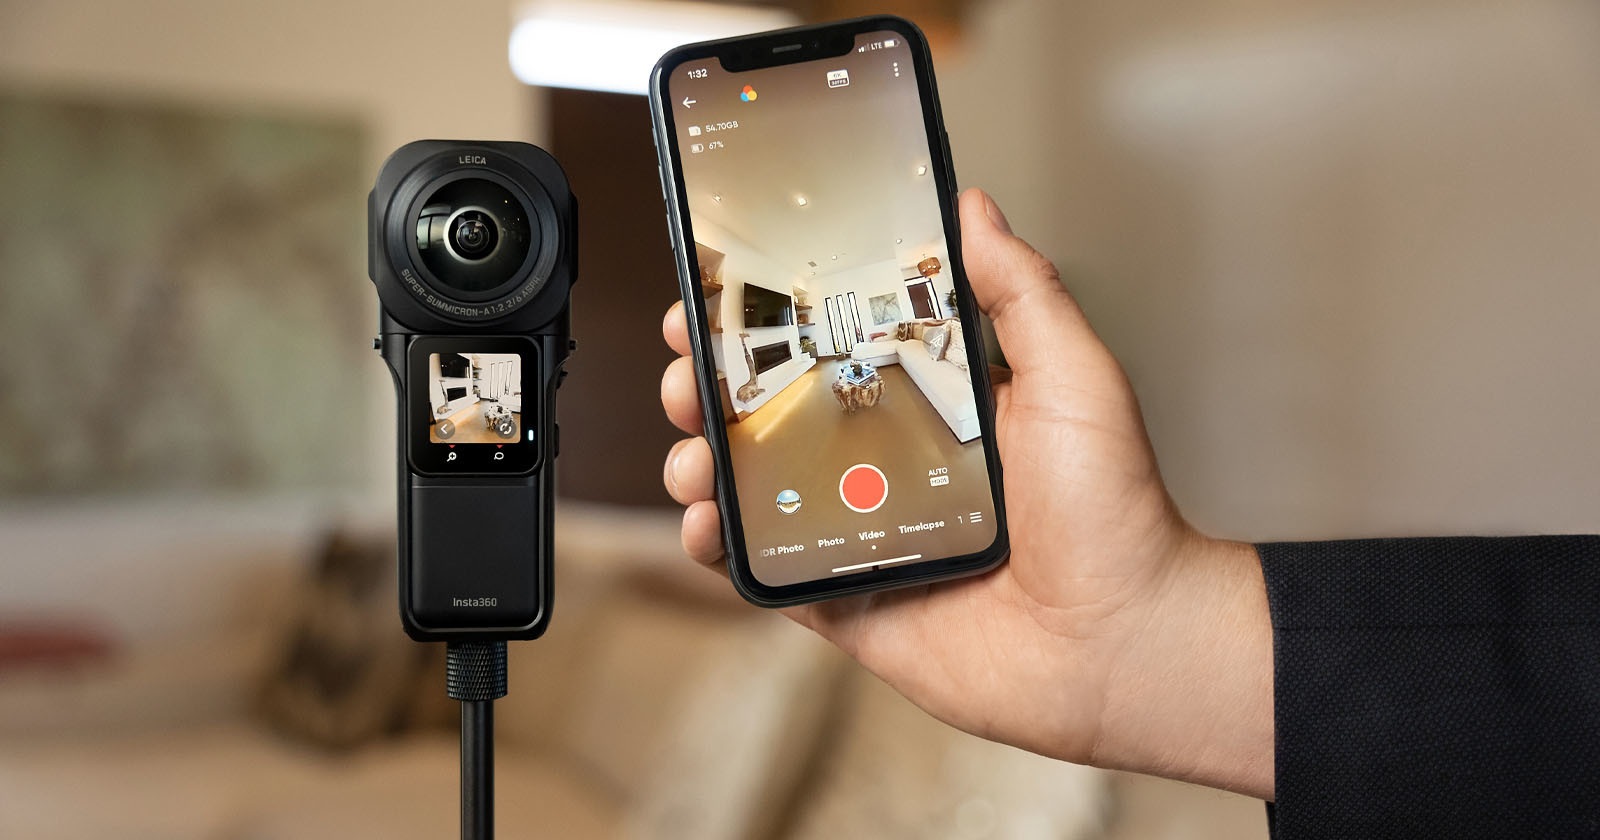 Select Insta360 Cameras are Now Compatible with Matterport